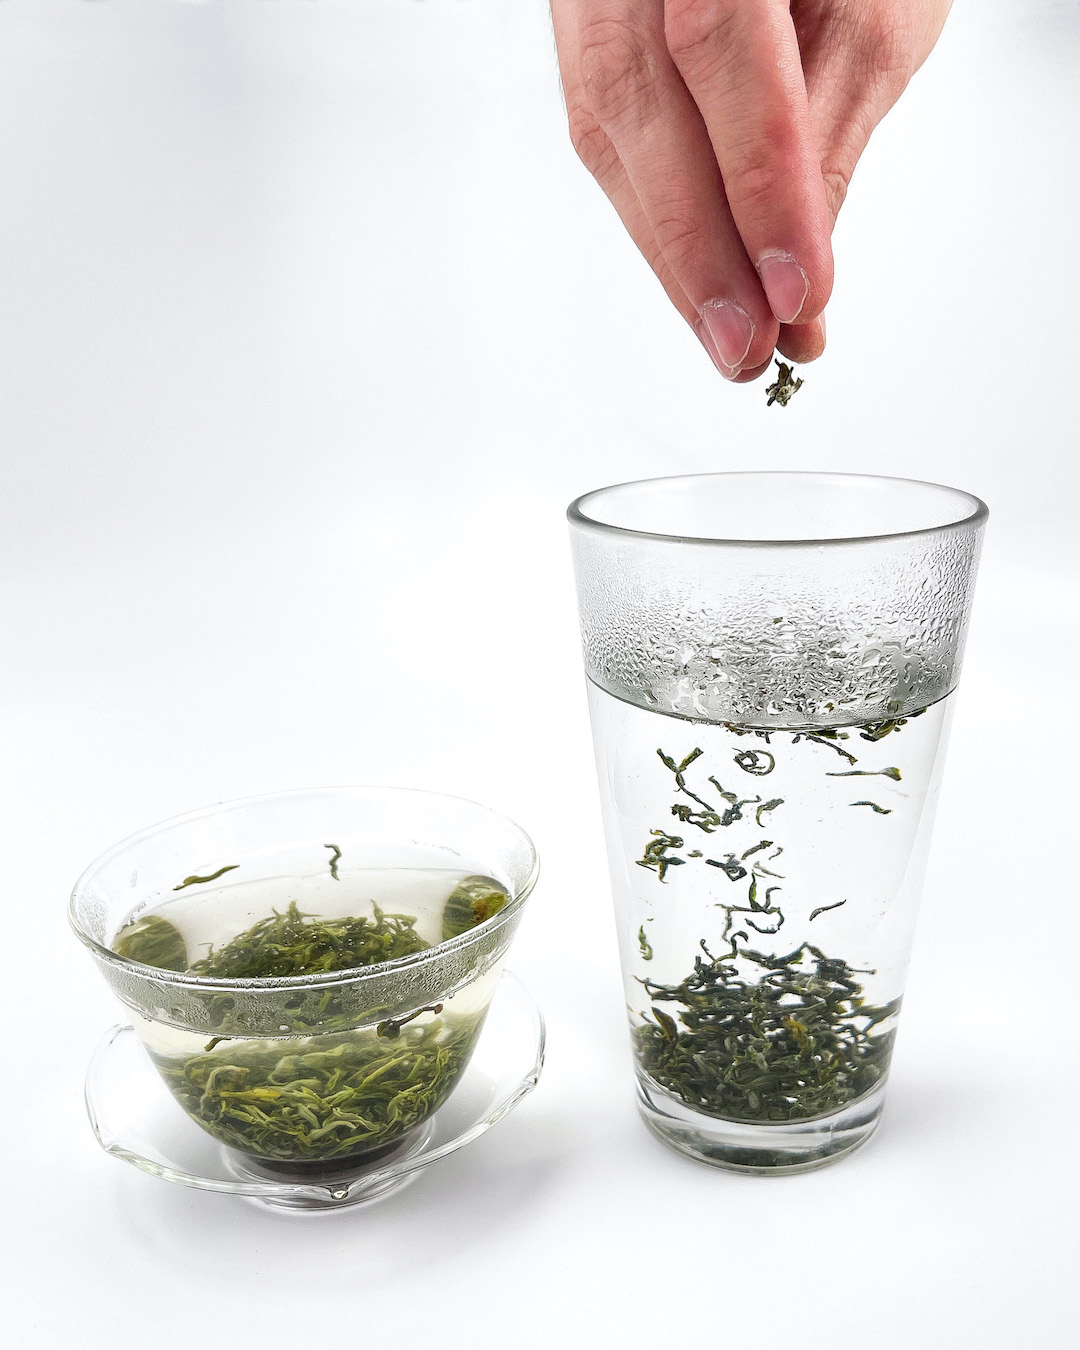 A hand sprinkling dry green tea leaves into a pint glass of hot water where they sink to the bottom and unfurl. Next to it, a glass gaiwan brewing already opened leaves.